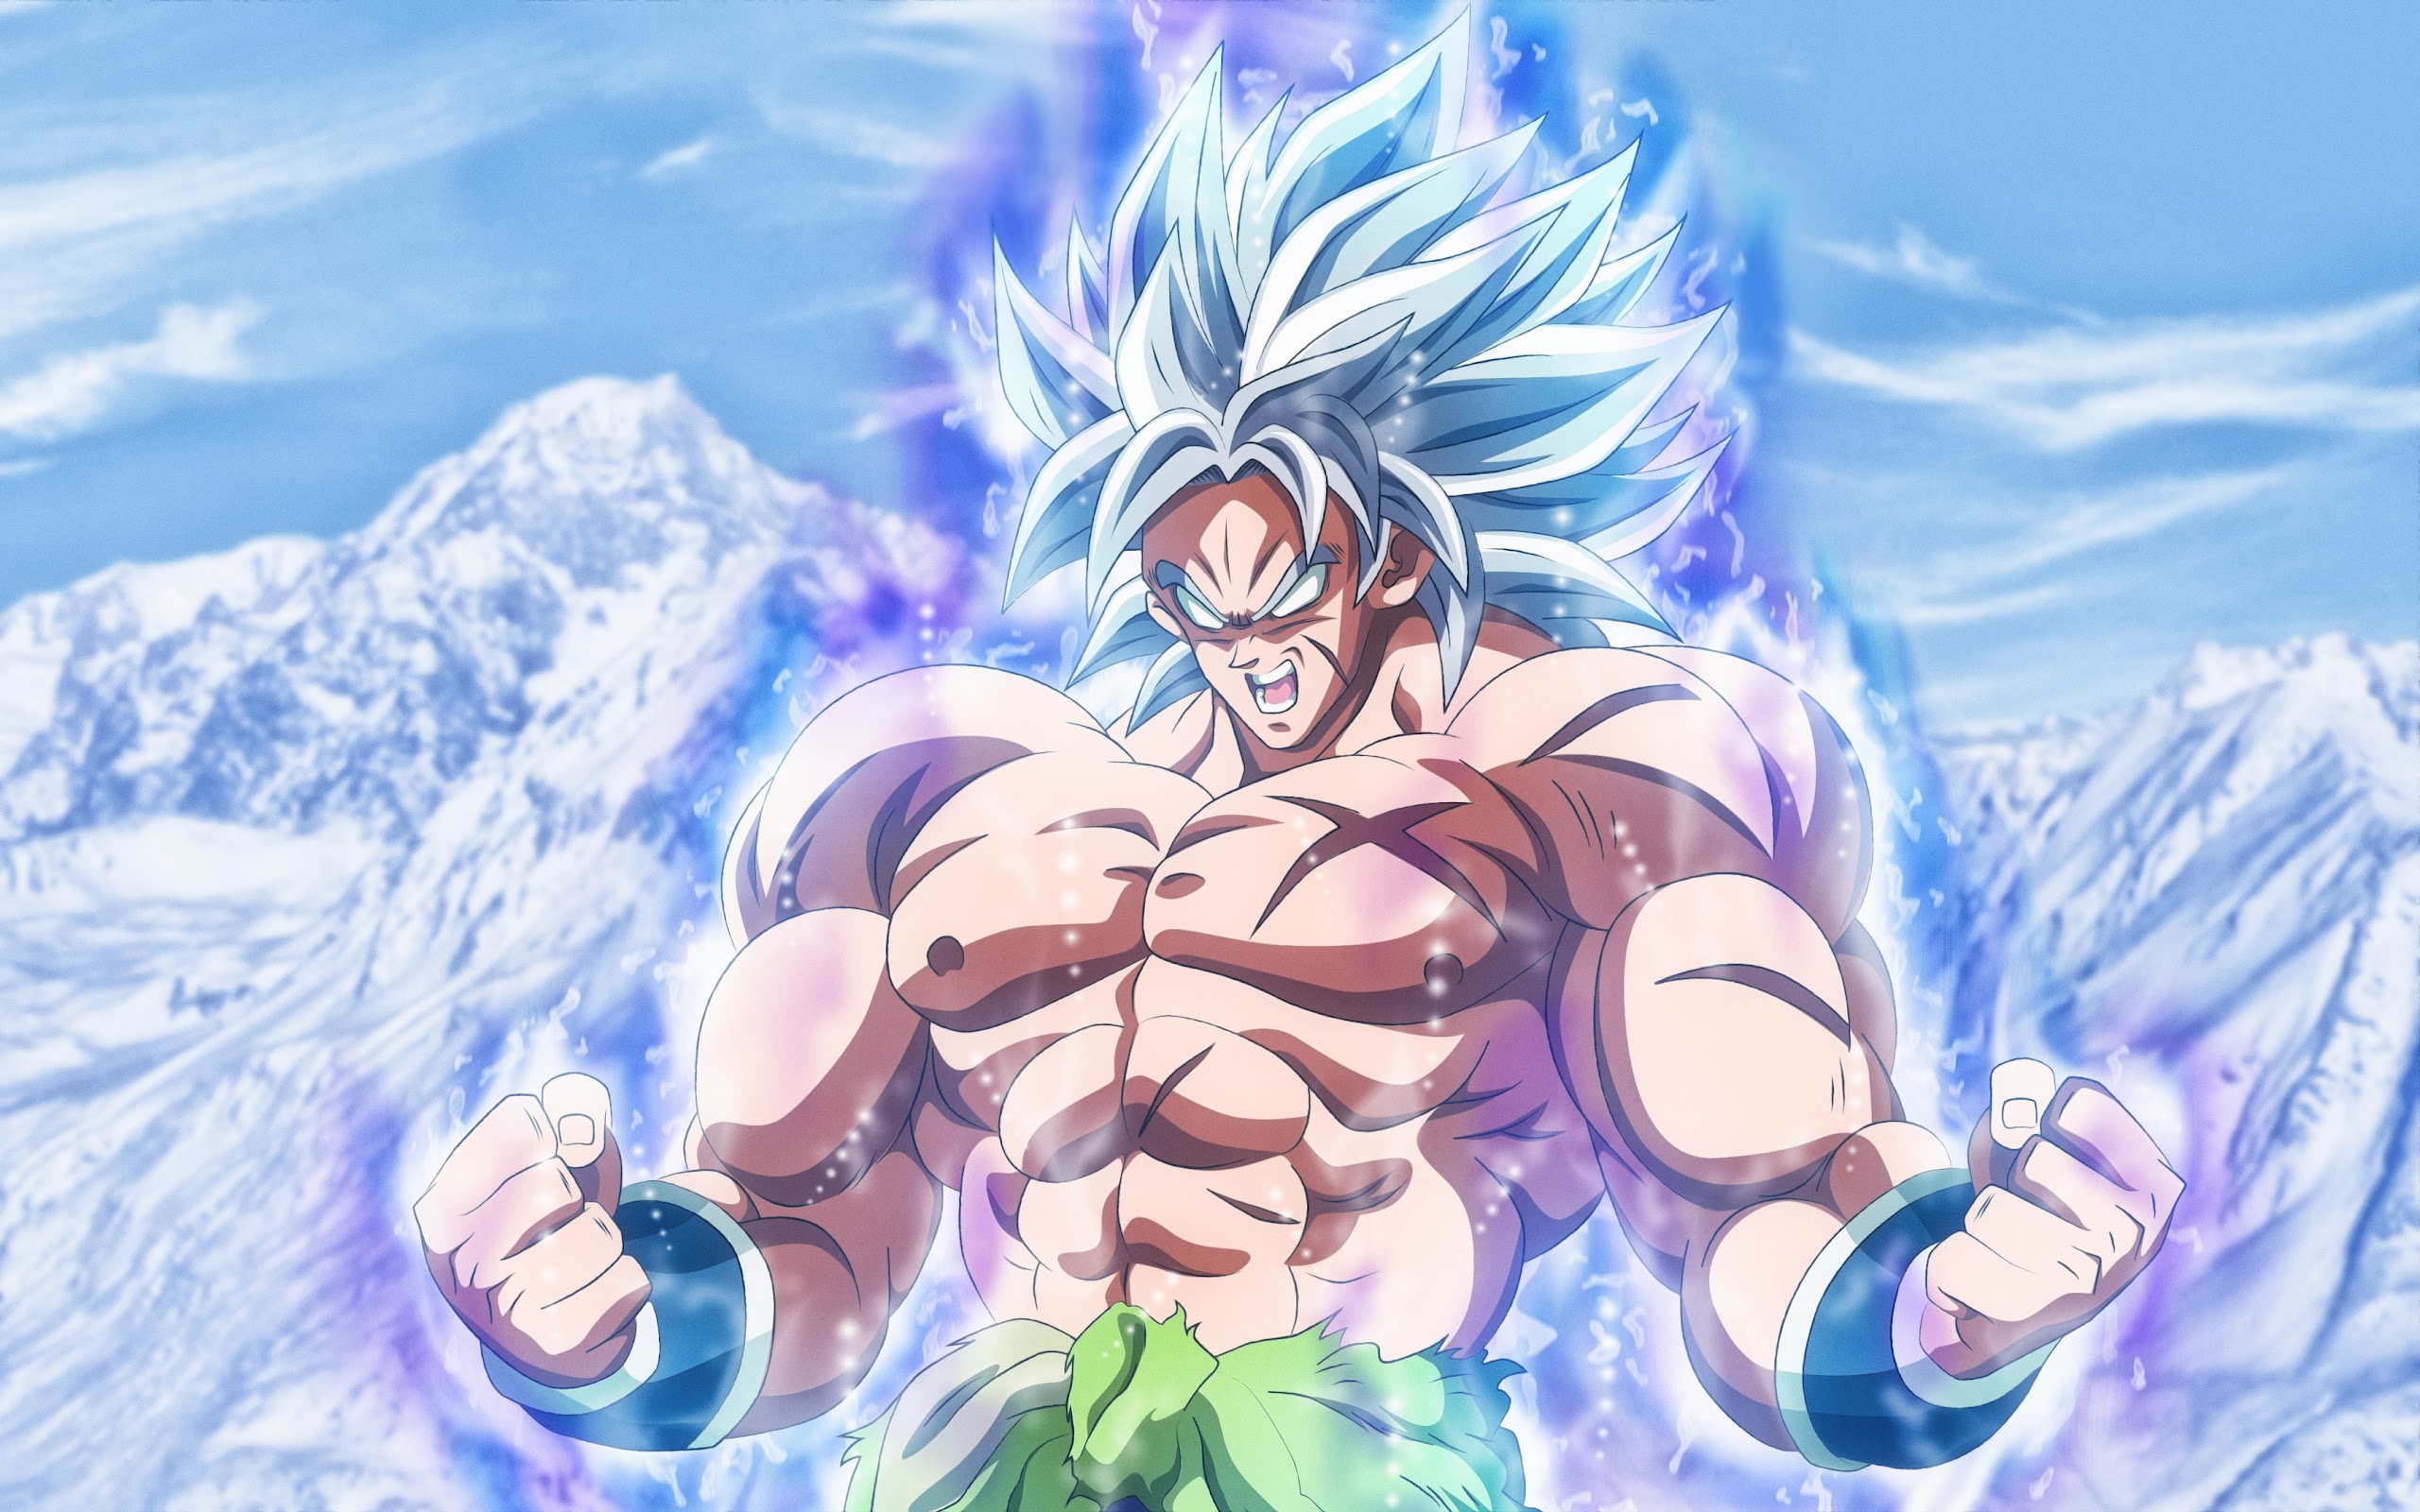 Dragon Ball Super: Broly's Blue Hair Form - How Strong is it? - wide 6